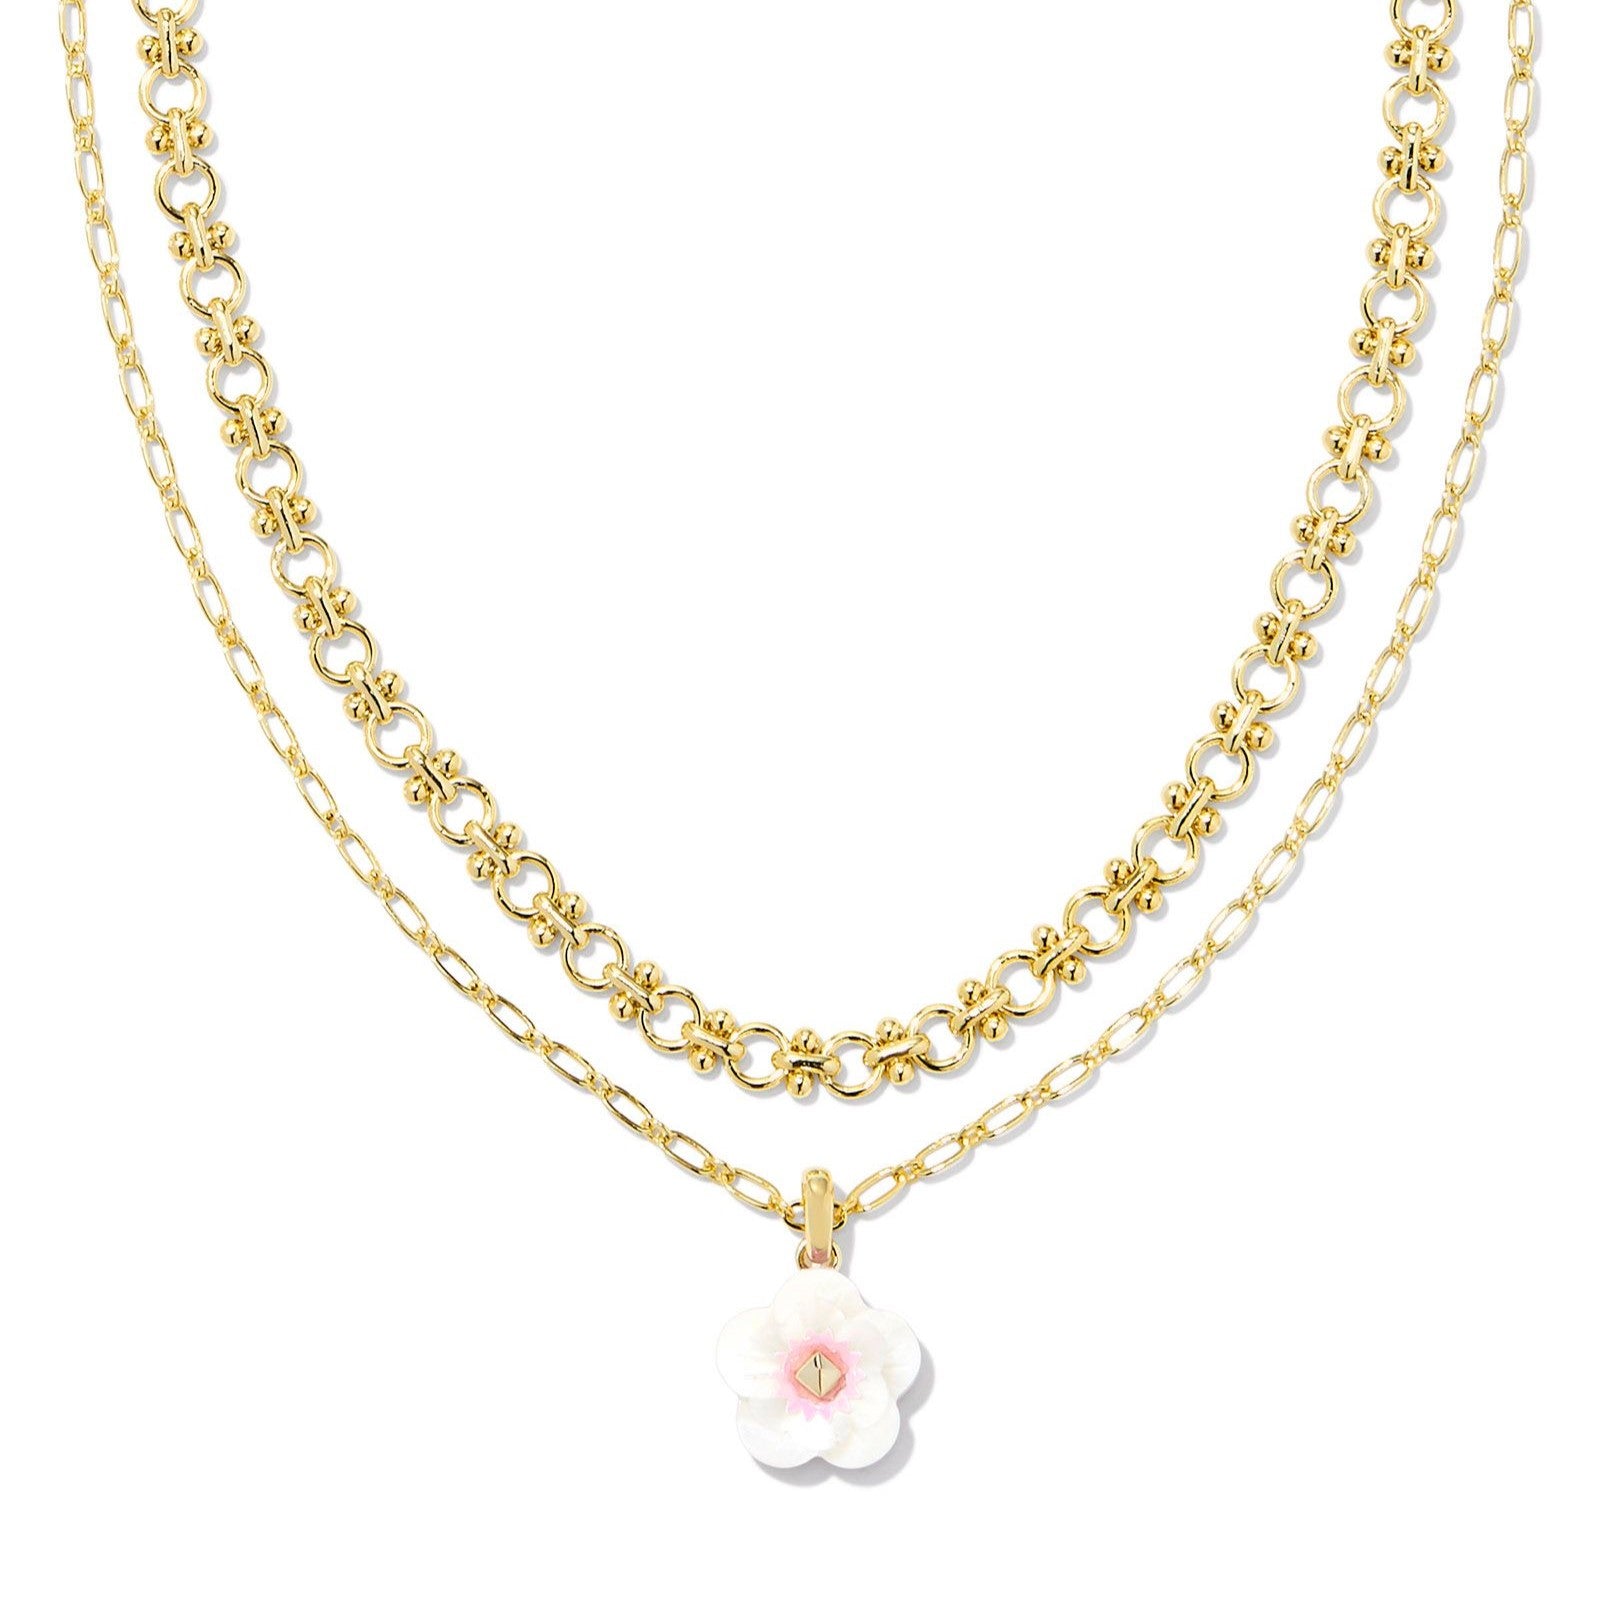 Kendra Scott | Deliah Gold Multi Strand Necklace in Iridescent Pink and White Mix - Giddy Up Glamour Boutique